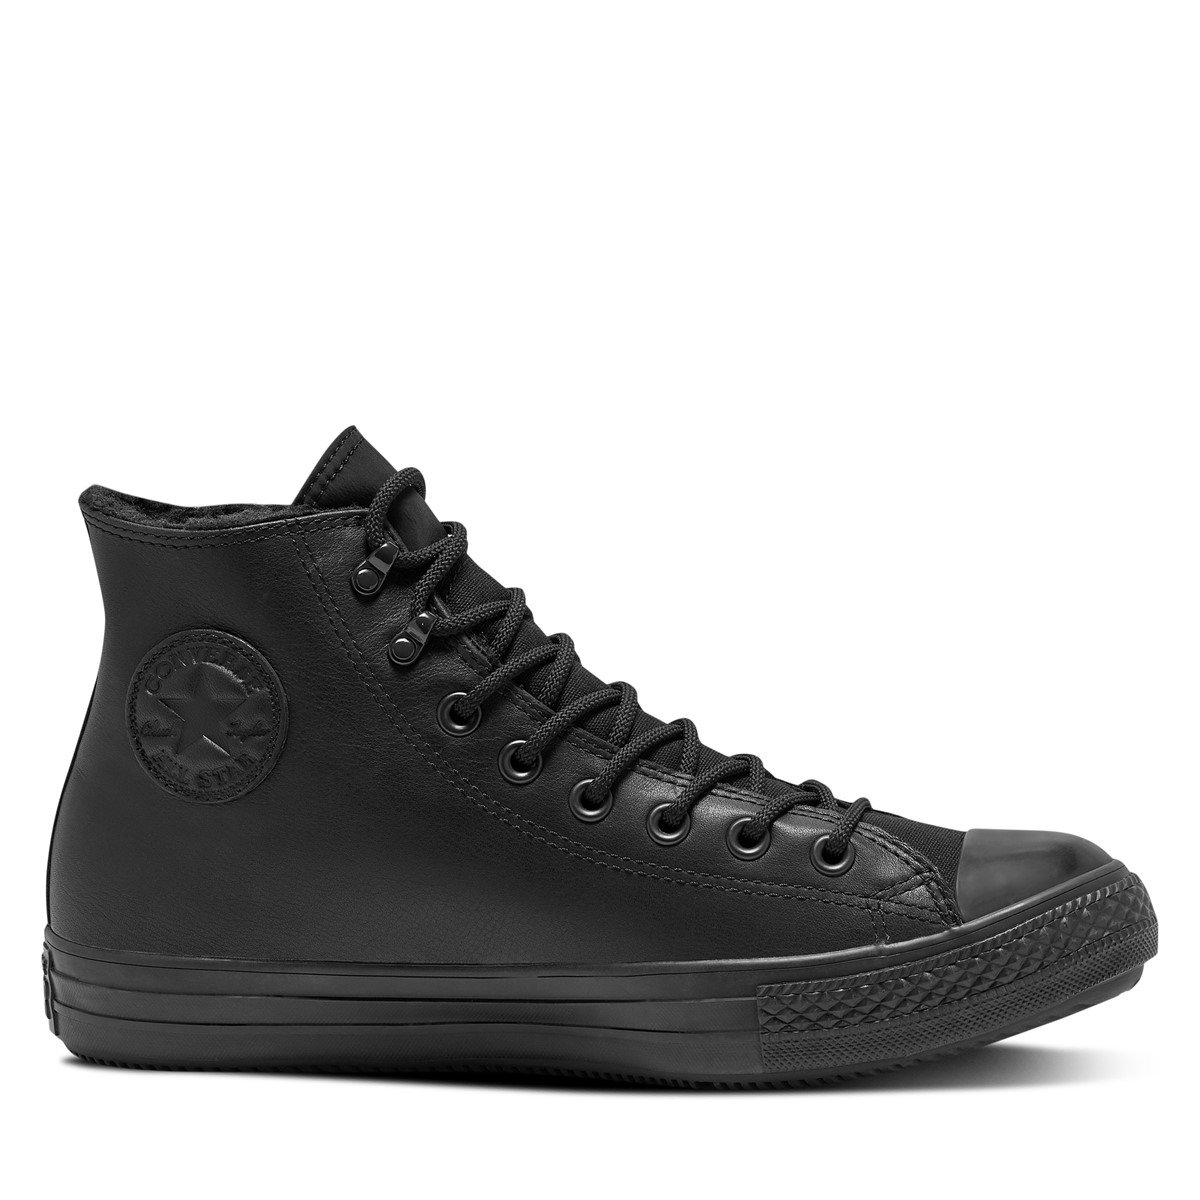 Men's Chuck Taylor All Star GORE-TEX High-Top Sneaker Boots in Black